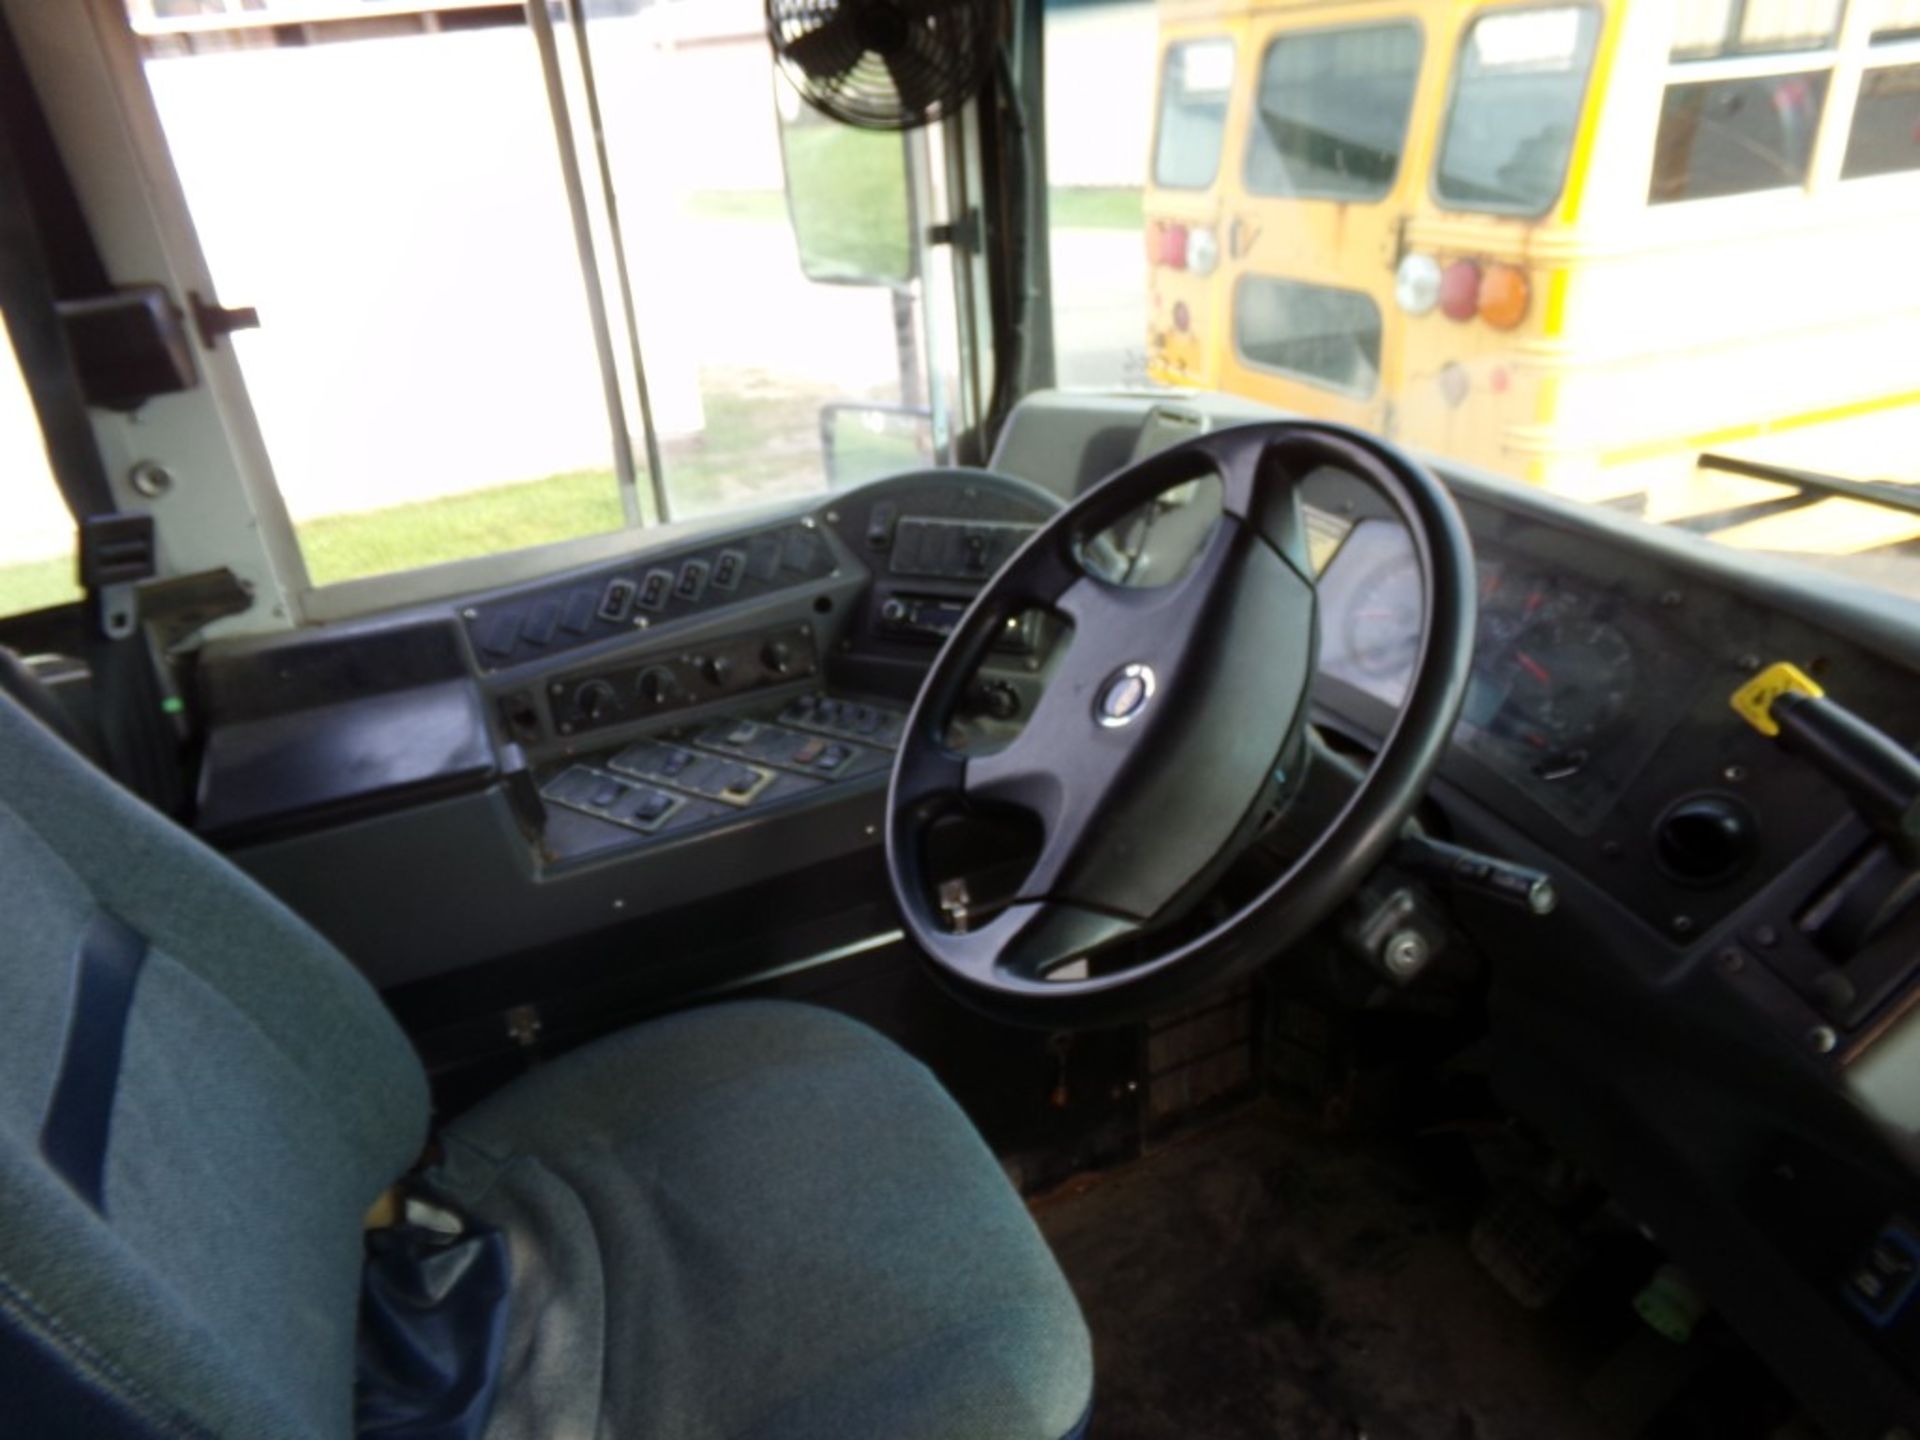 2012 Blue Bird Conventional Front School Bus, #133, Seats 48A-71C, Auto, 33,000 GVW, 100,341 - Image 10 of 11